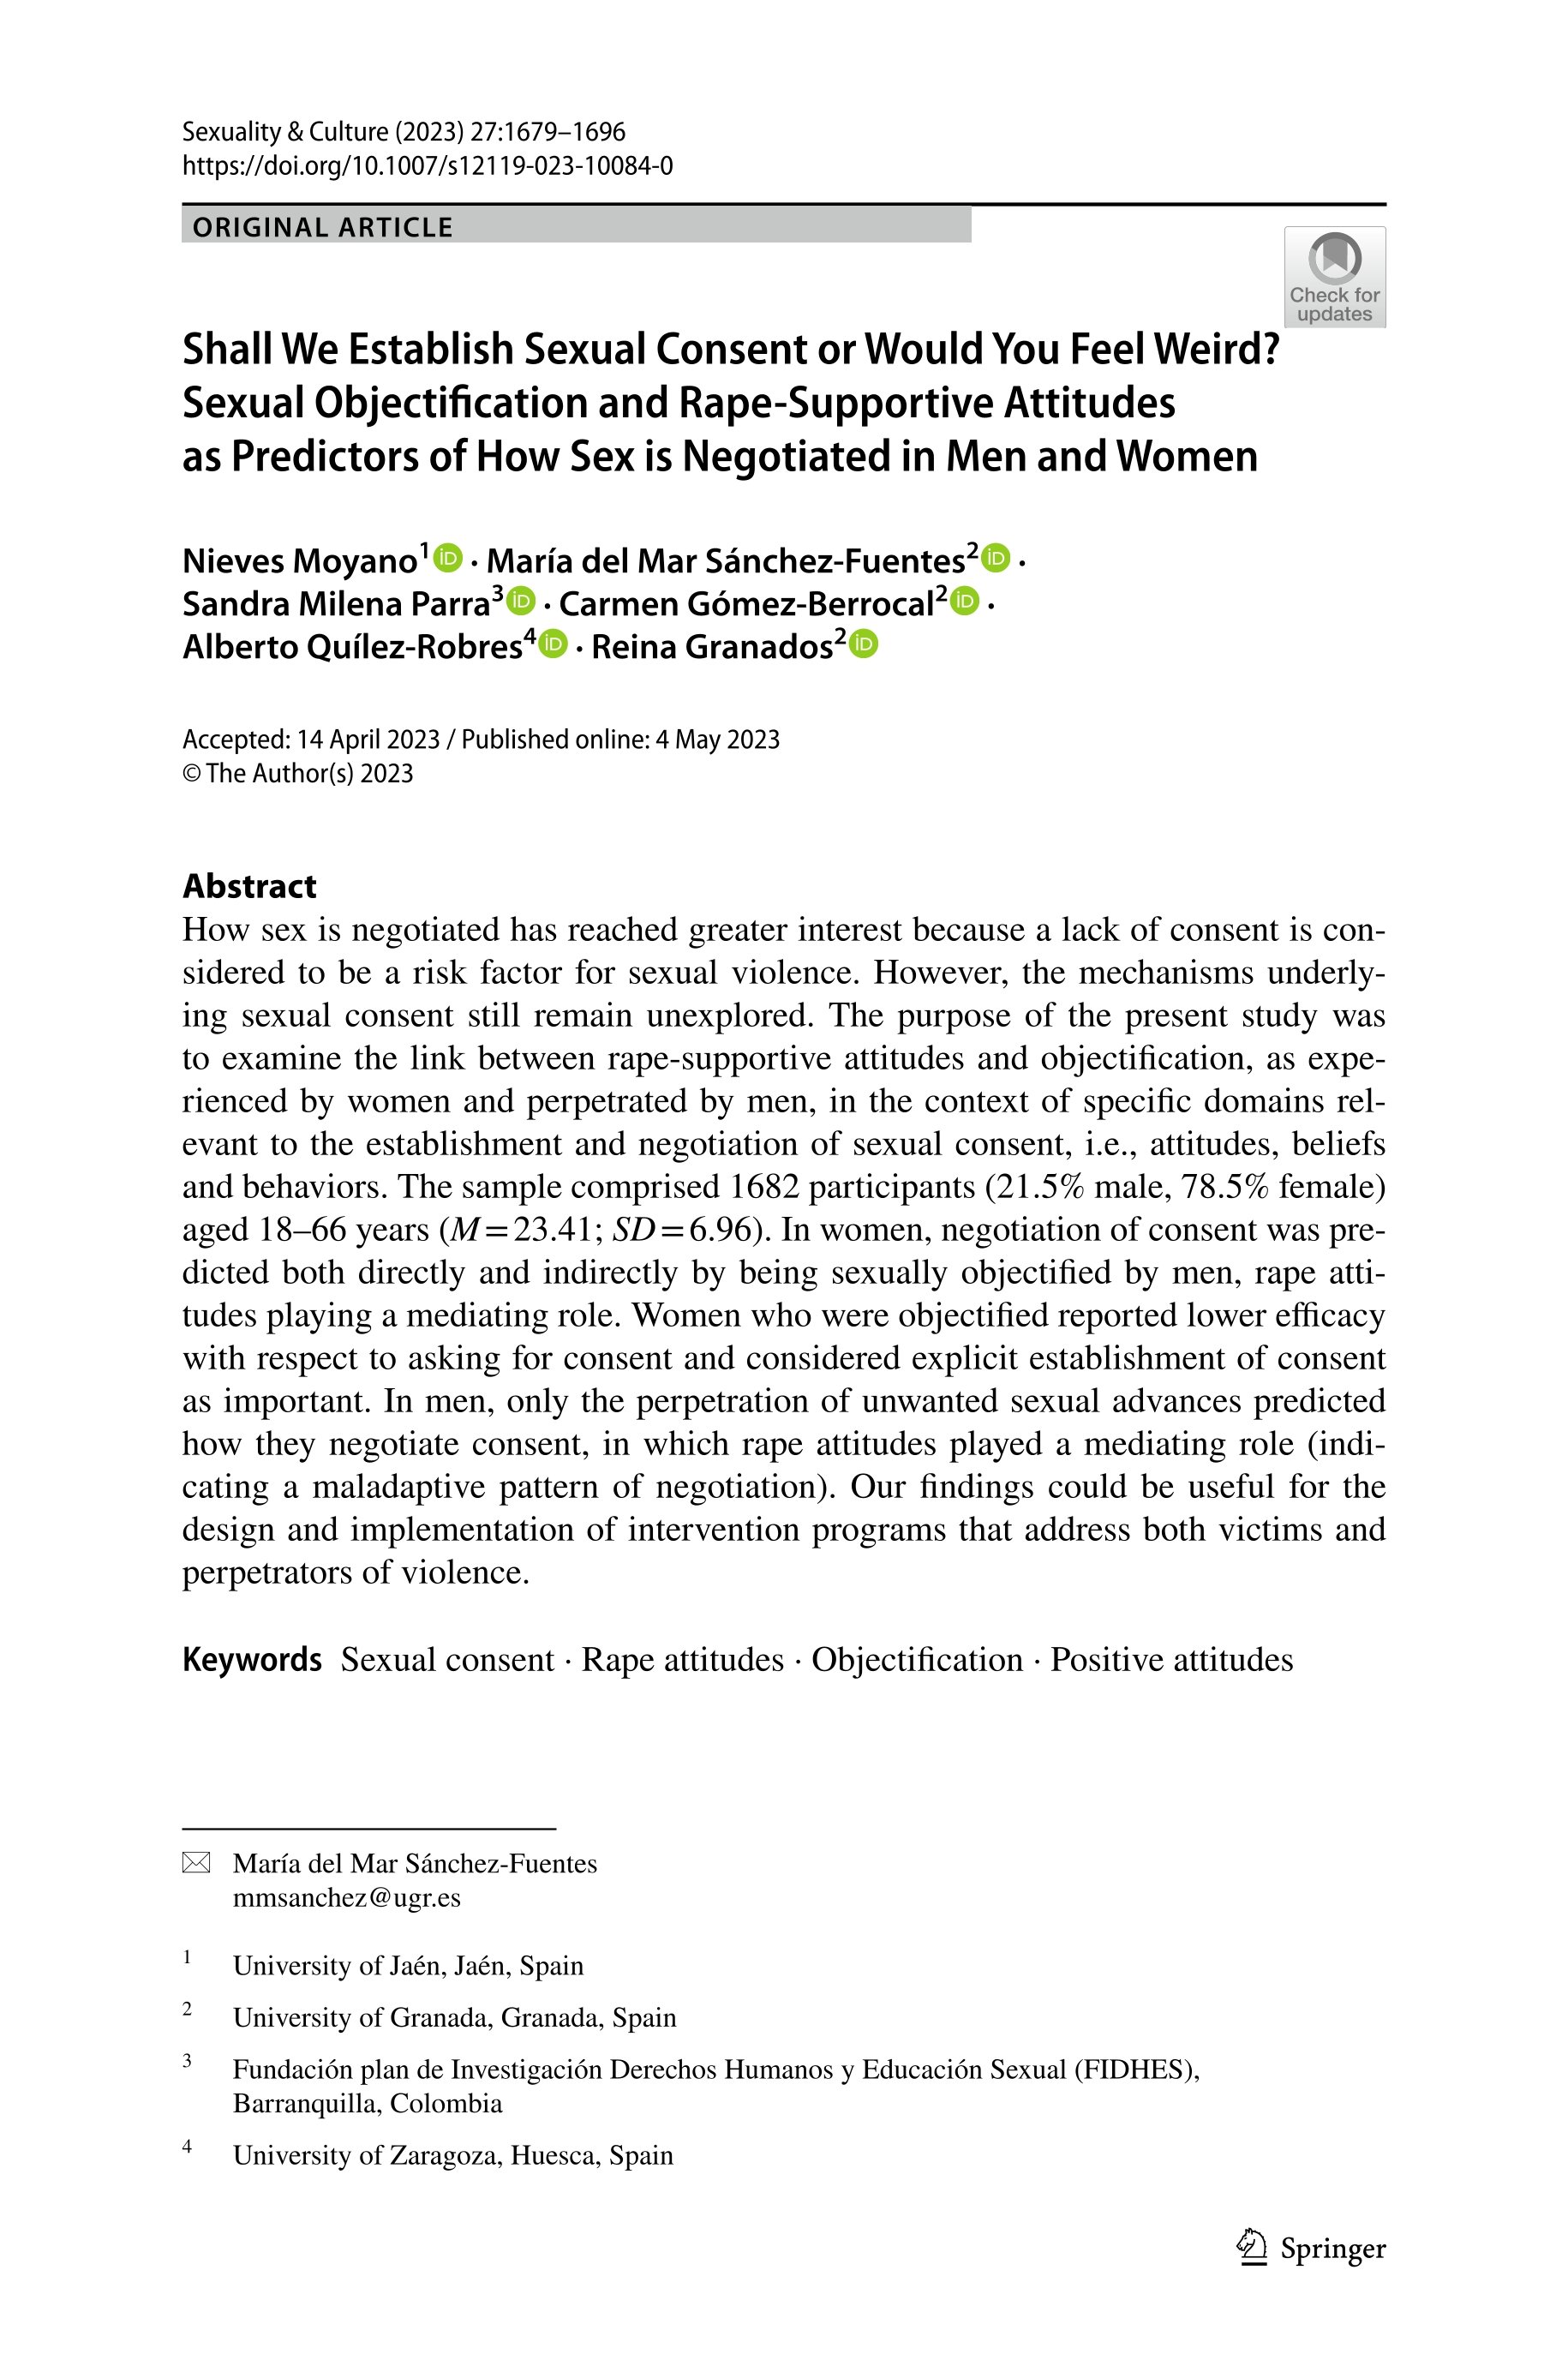 Shall We Establish Sexual Consent or Would You Feel Weird? Sexual Objectification and Rape-Supportive Attitudes as Predictors of How Sex is Negotiated in Men and Women